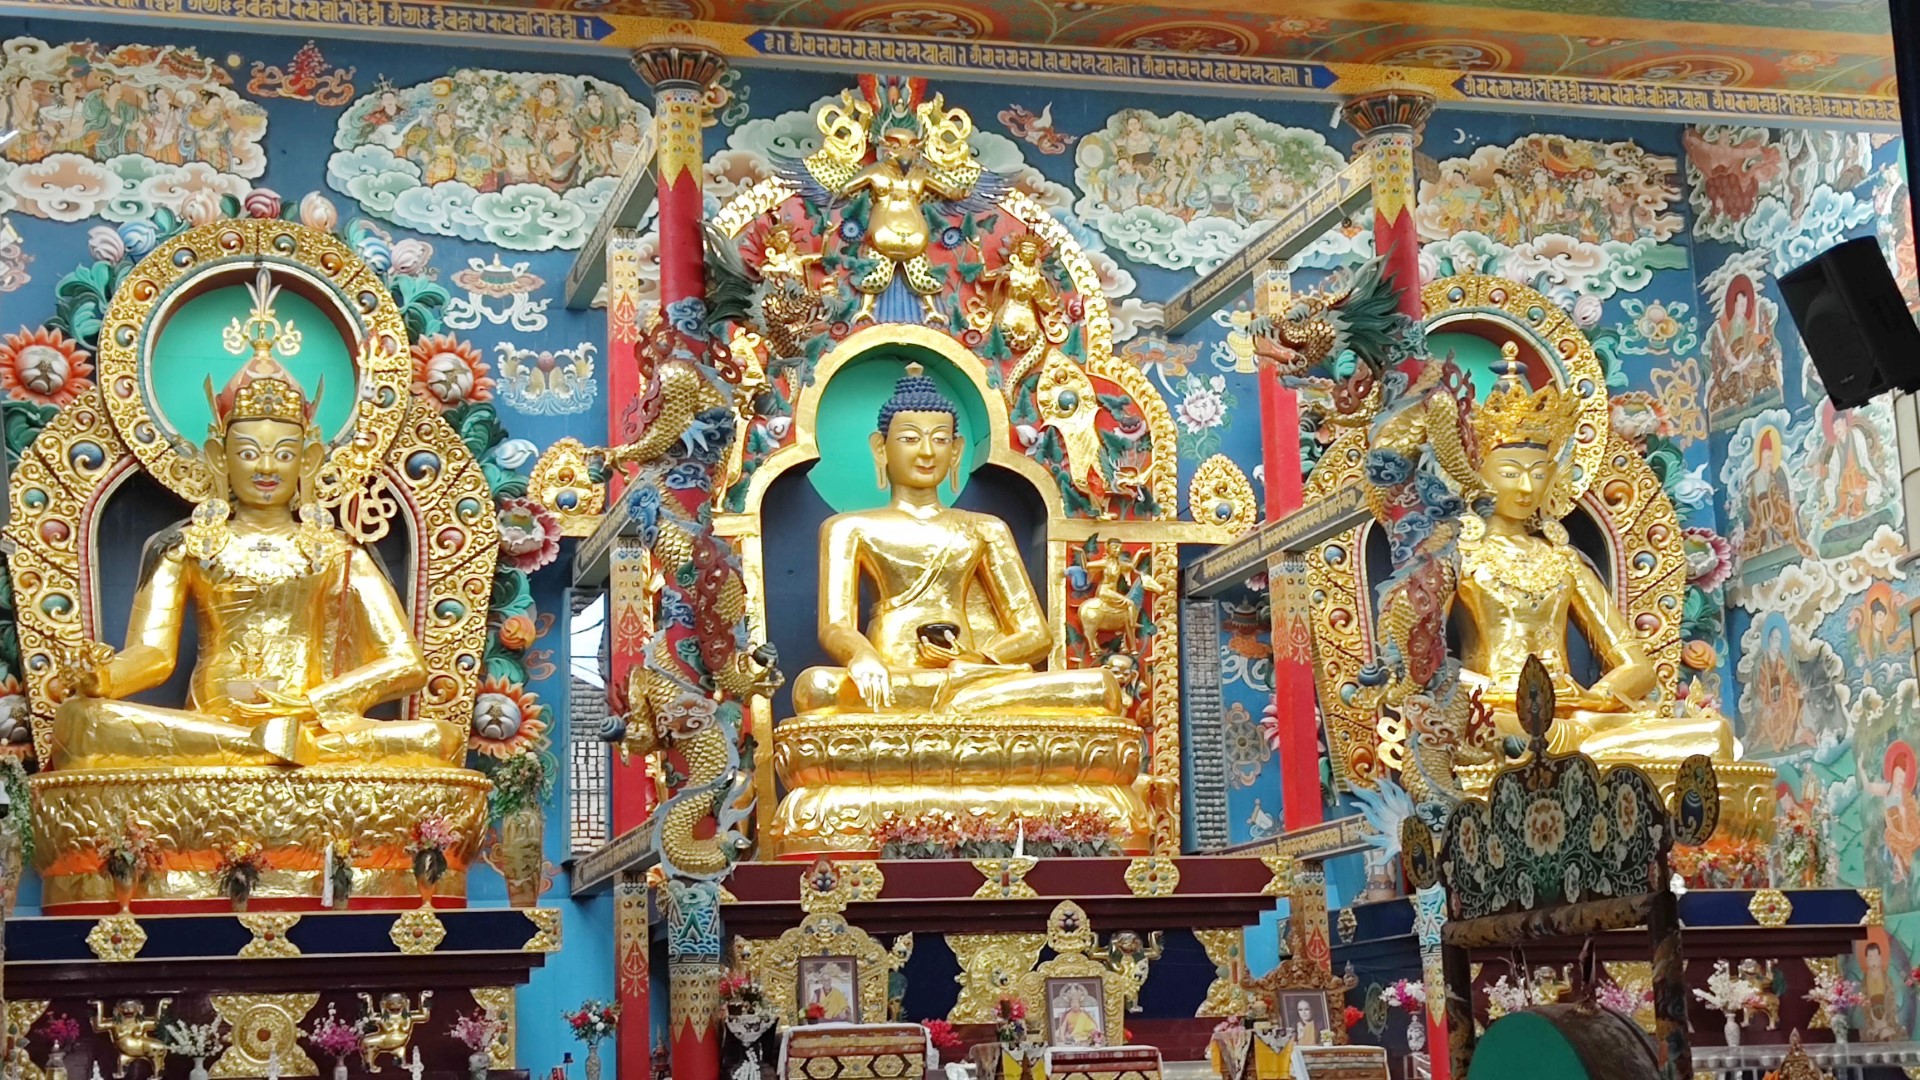 Golden statue of Lord Buddha at Namdroling Monastery